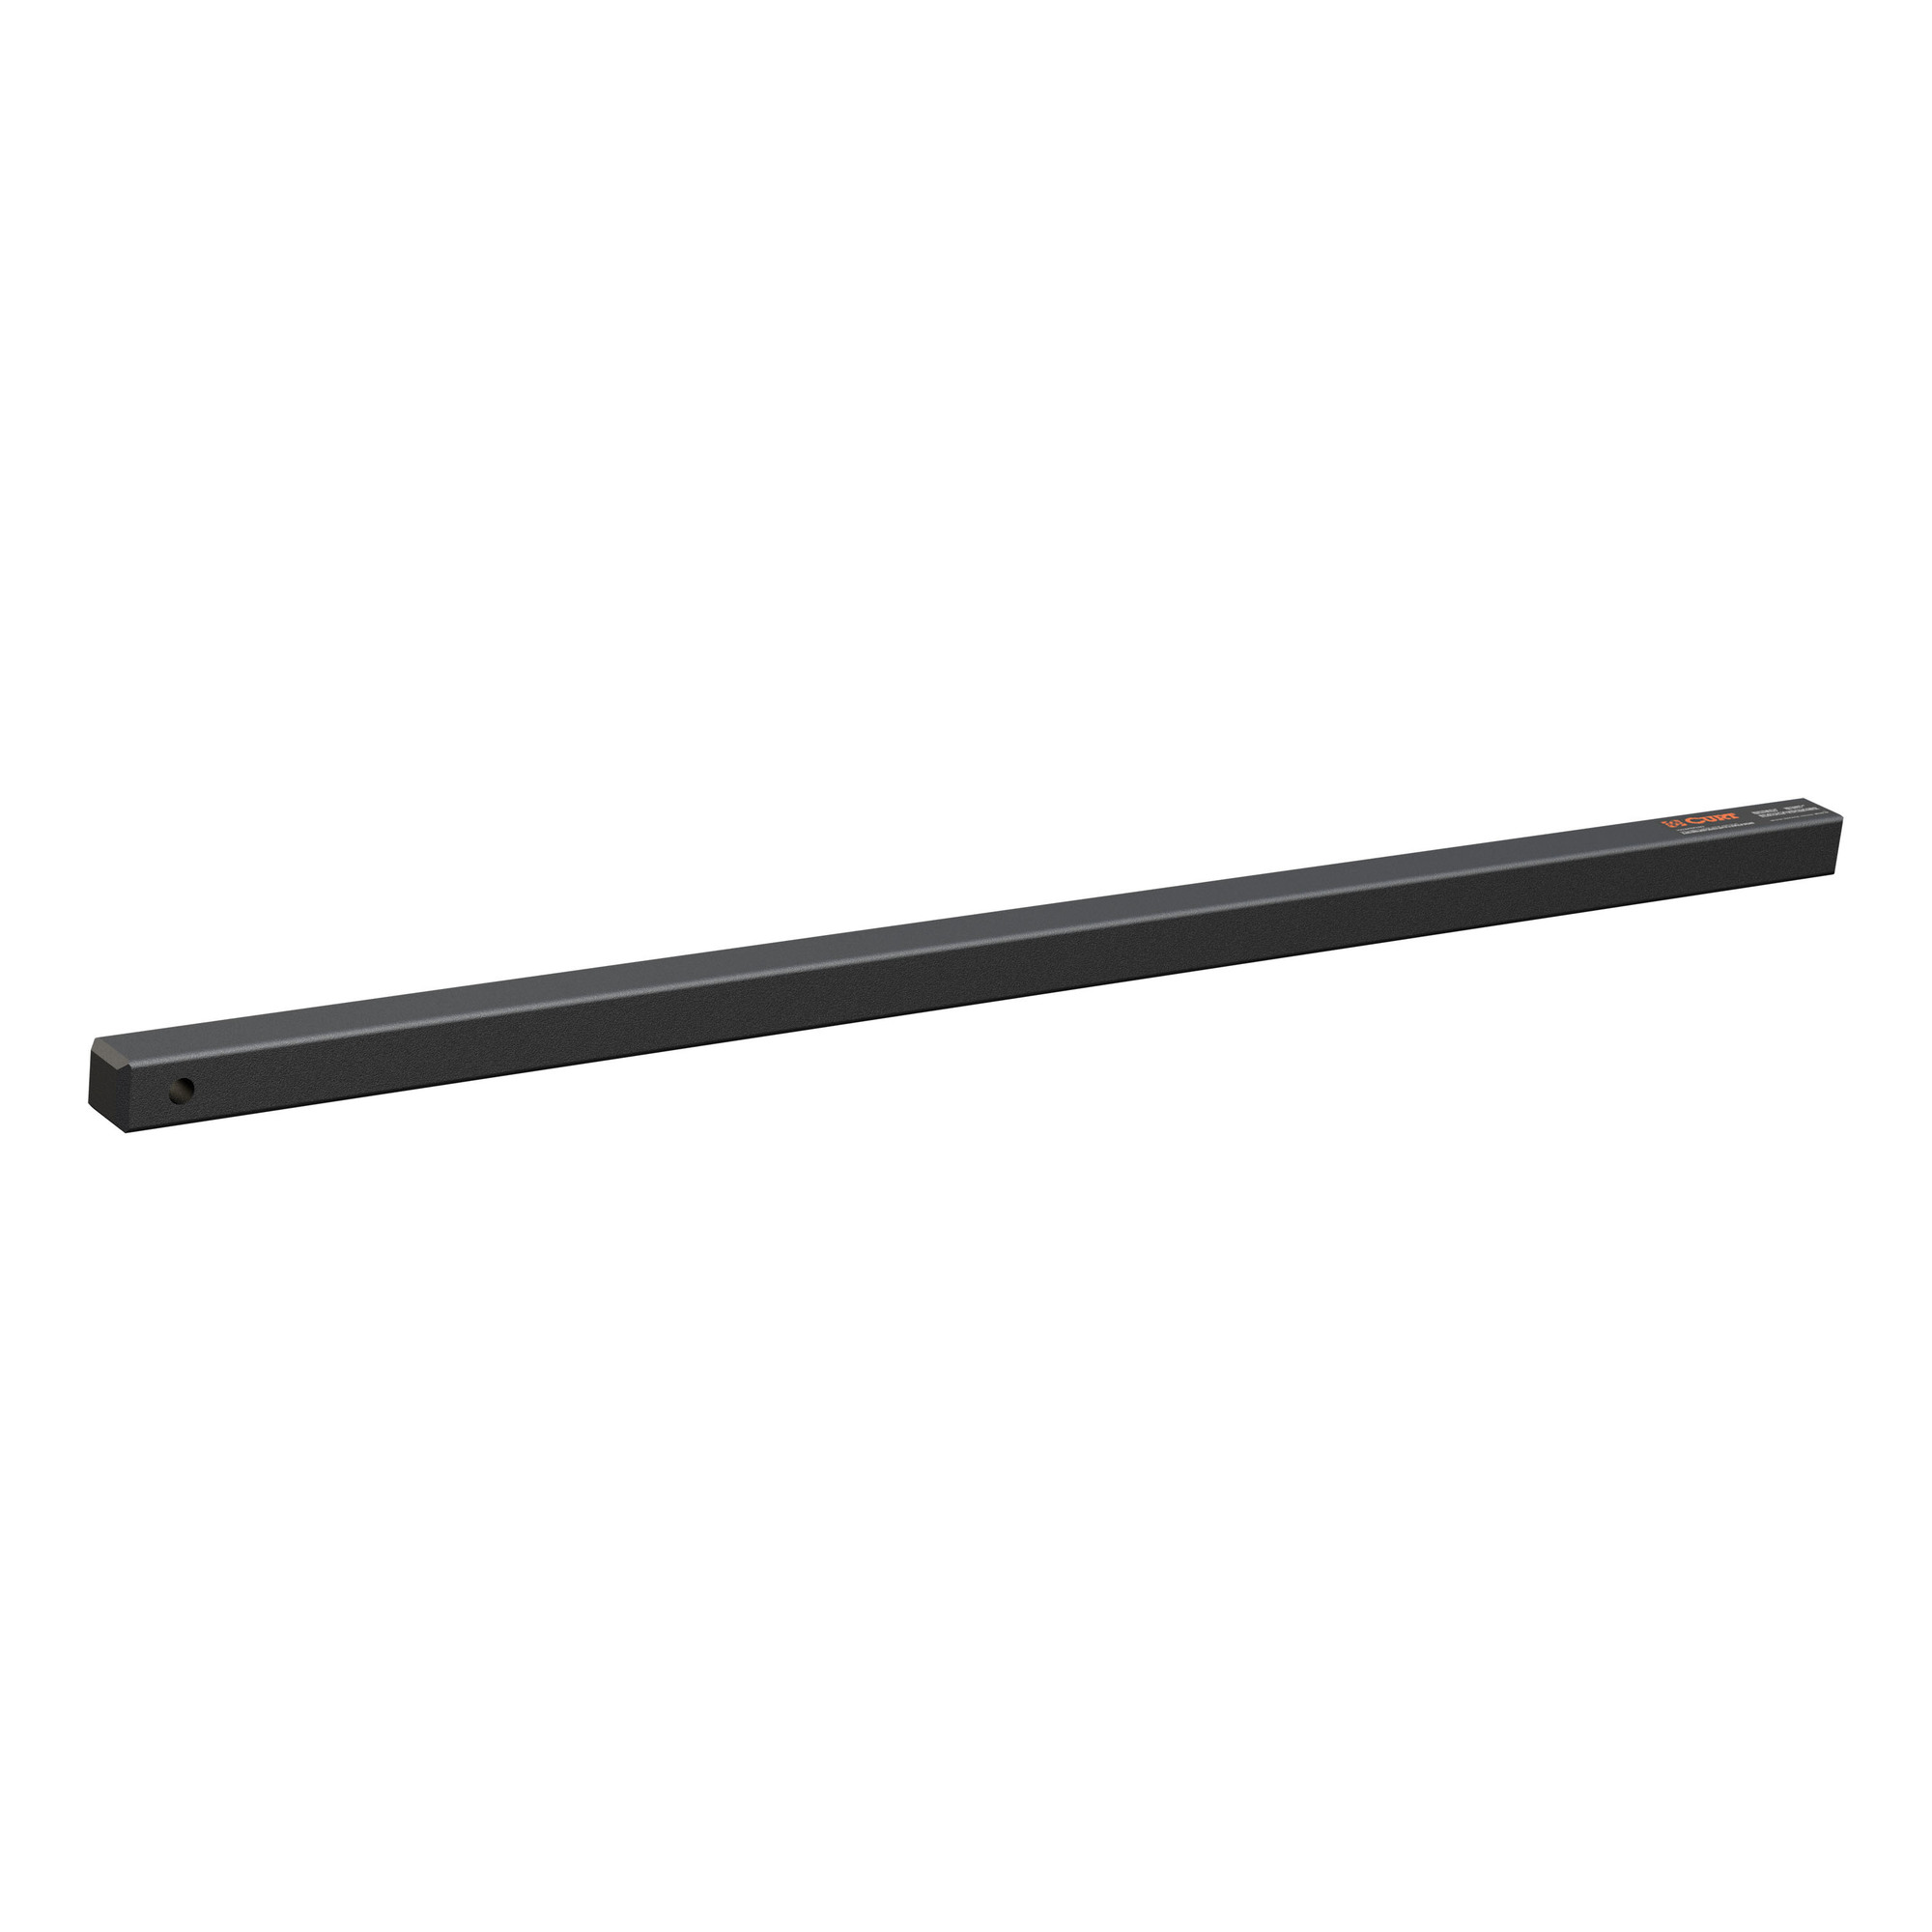 Manufacturing, Replacement TruTrack WD Spring Bar, Material Combination, Model - CURT 17537